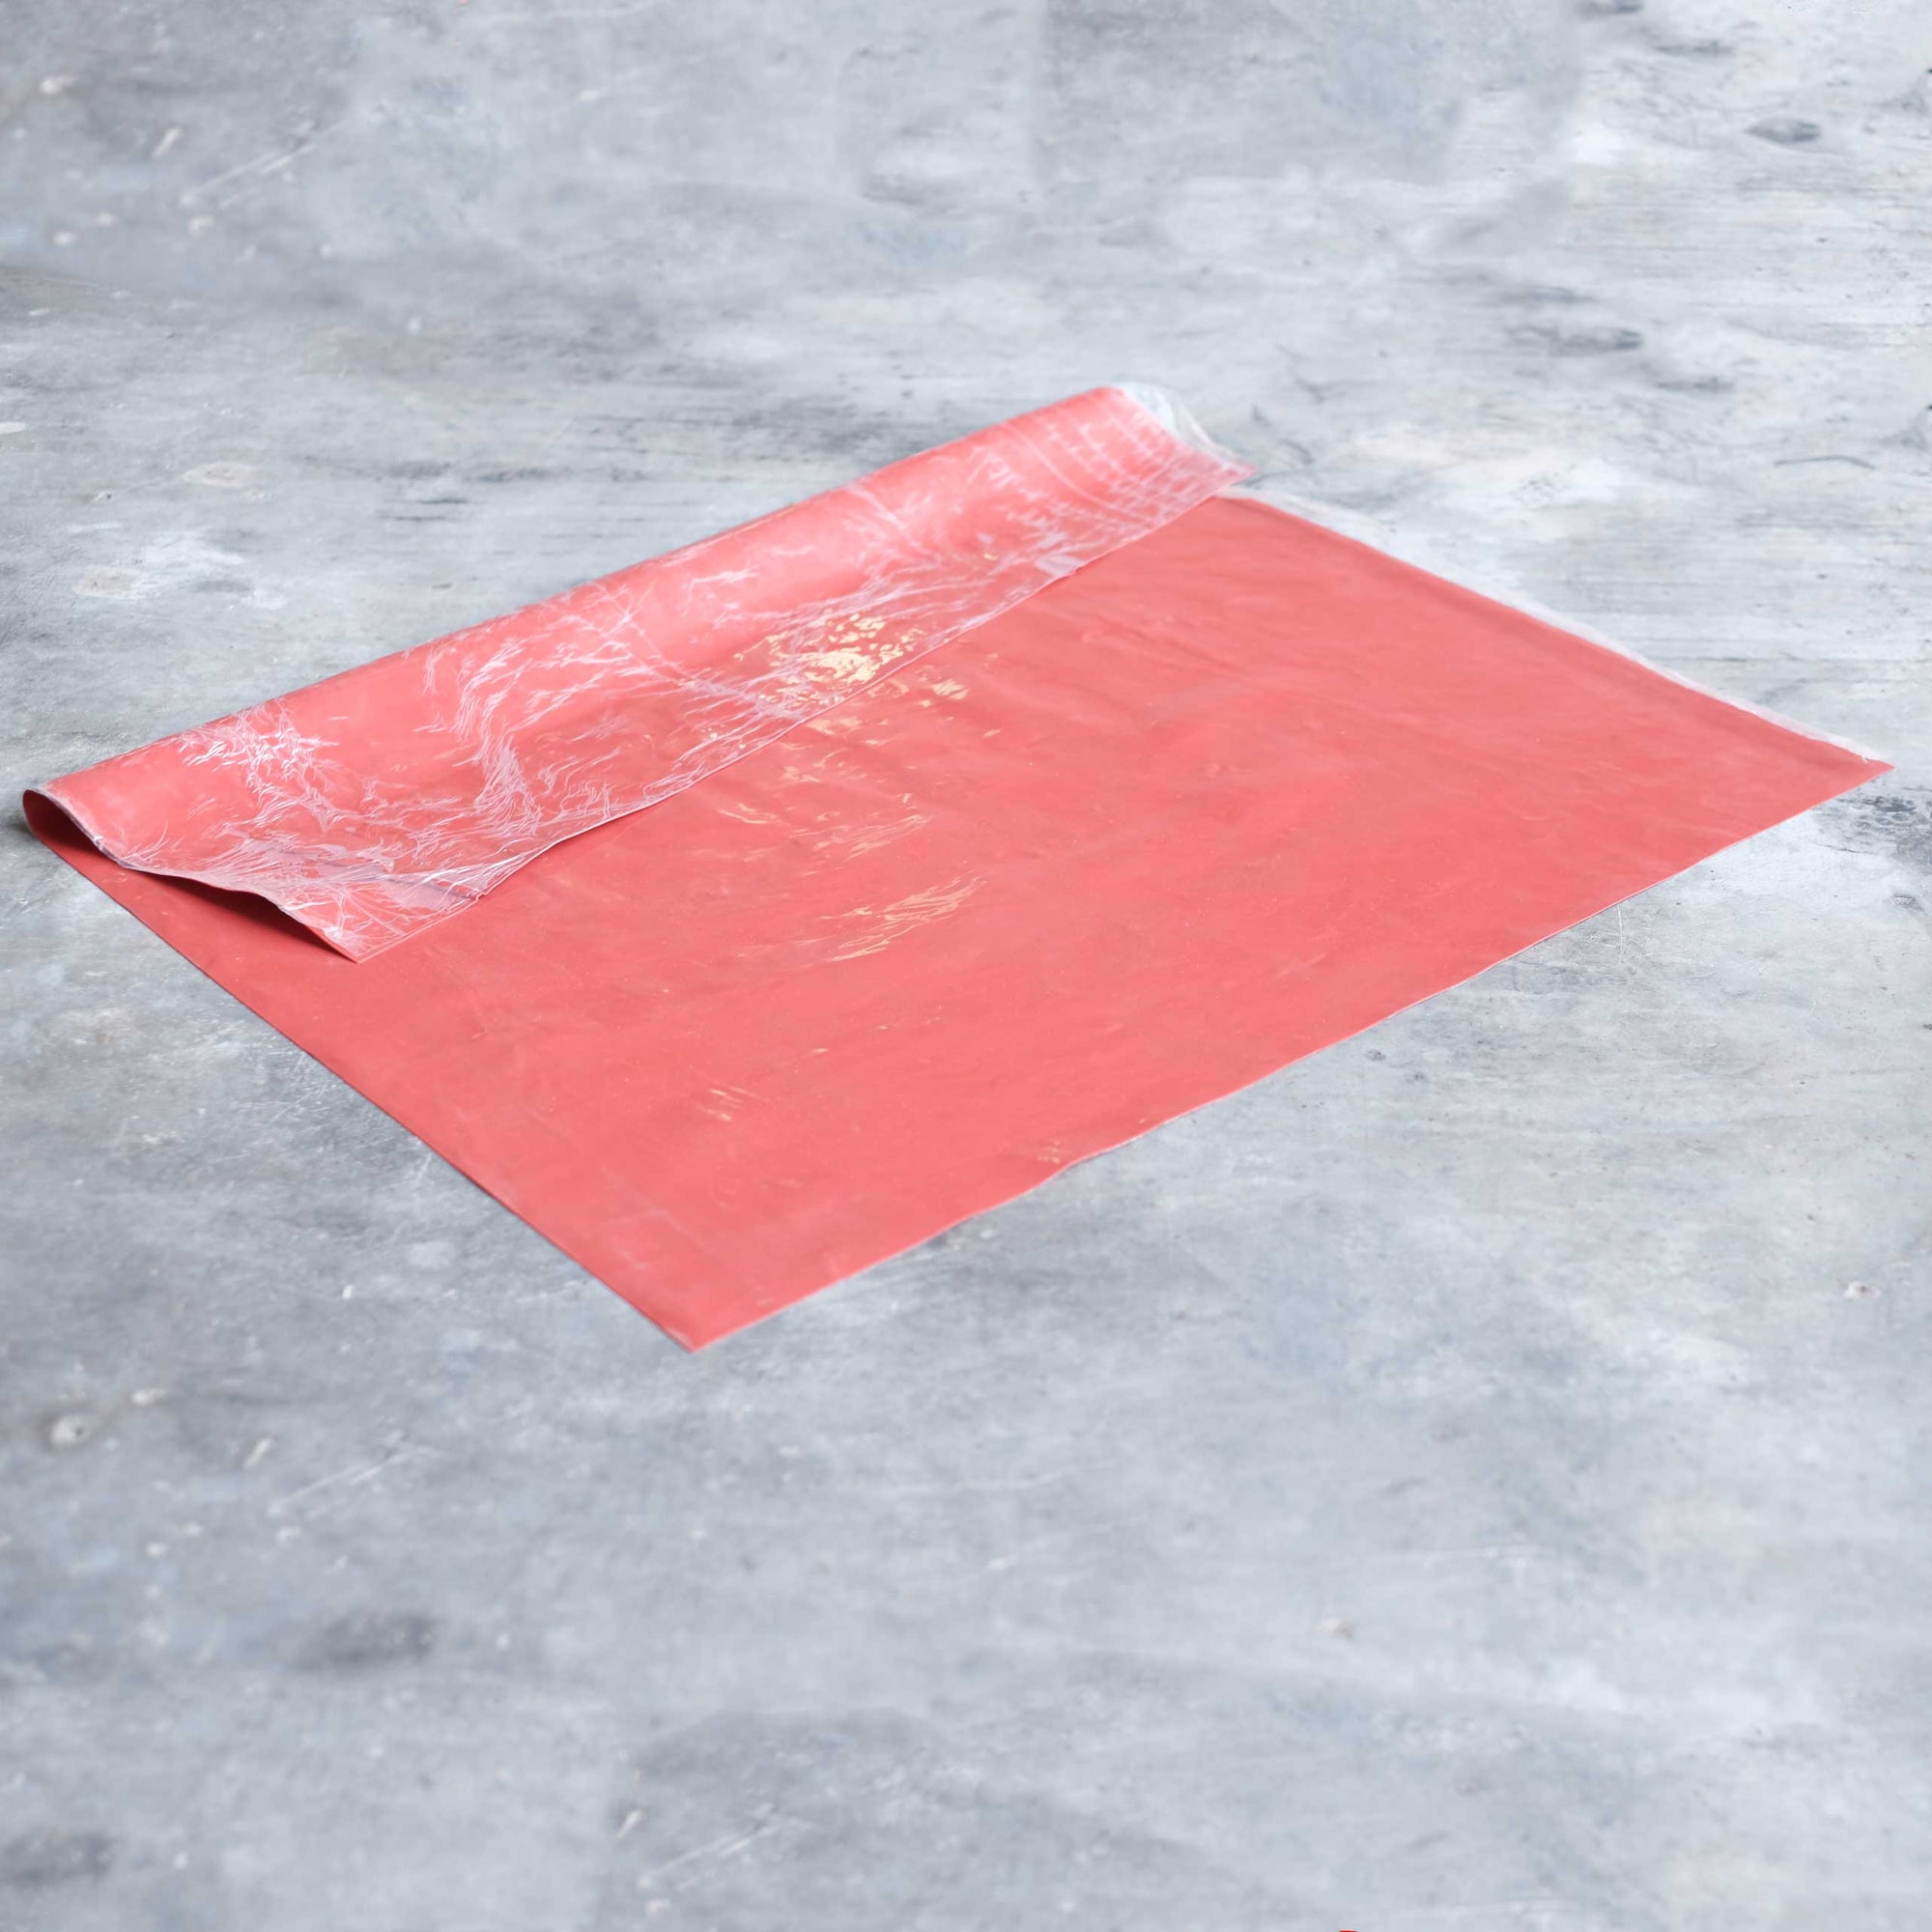 Silicone Sheet - ARIS Performance Silicone